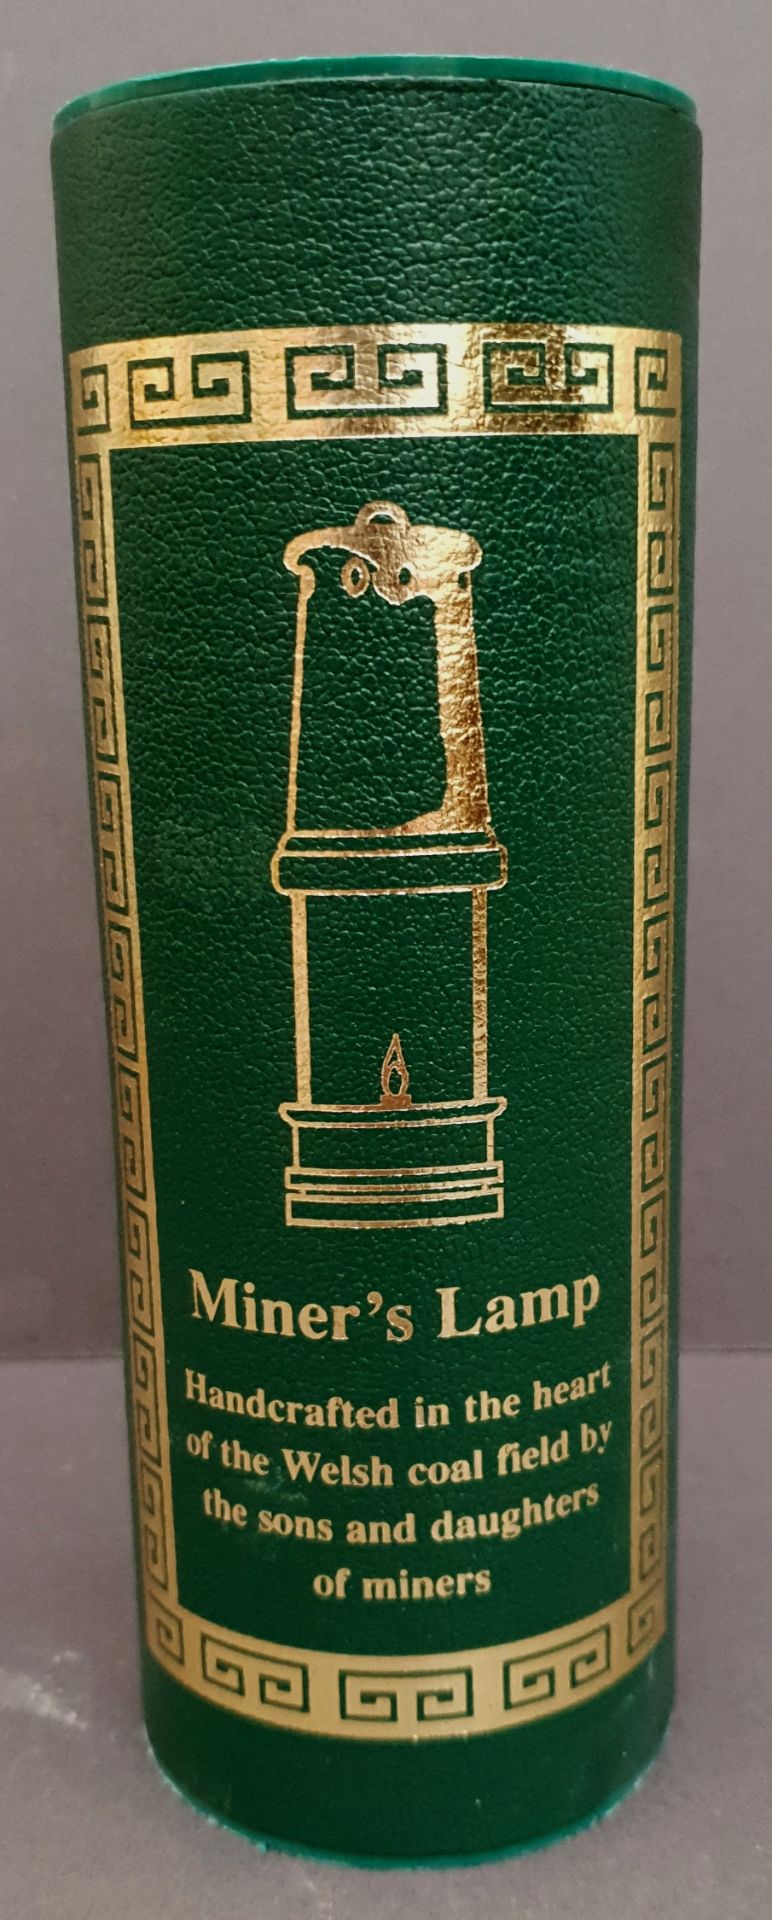 Vintage Welsh Miners Lamp by the Lamp & Limelight Company Hockley - Image 2 of 2